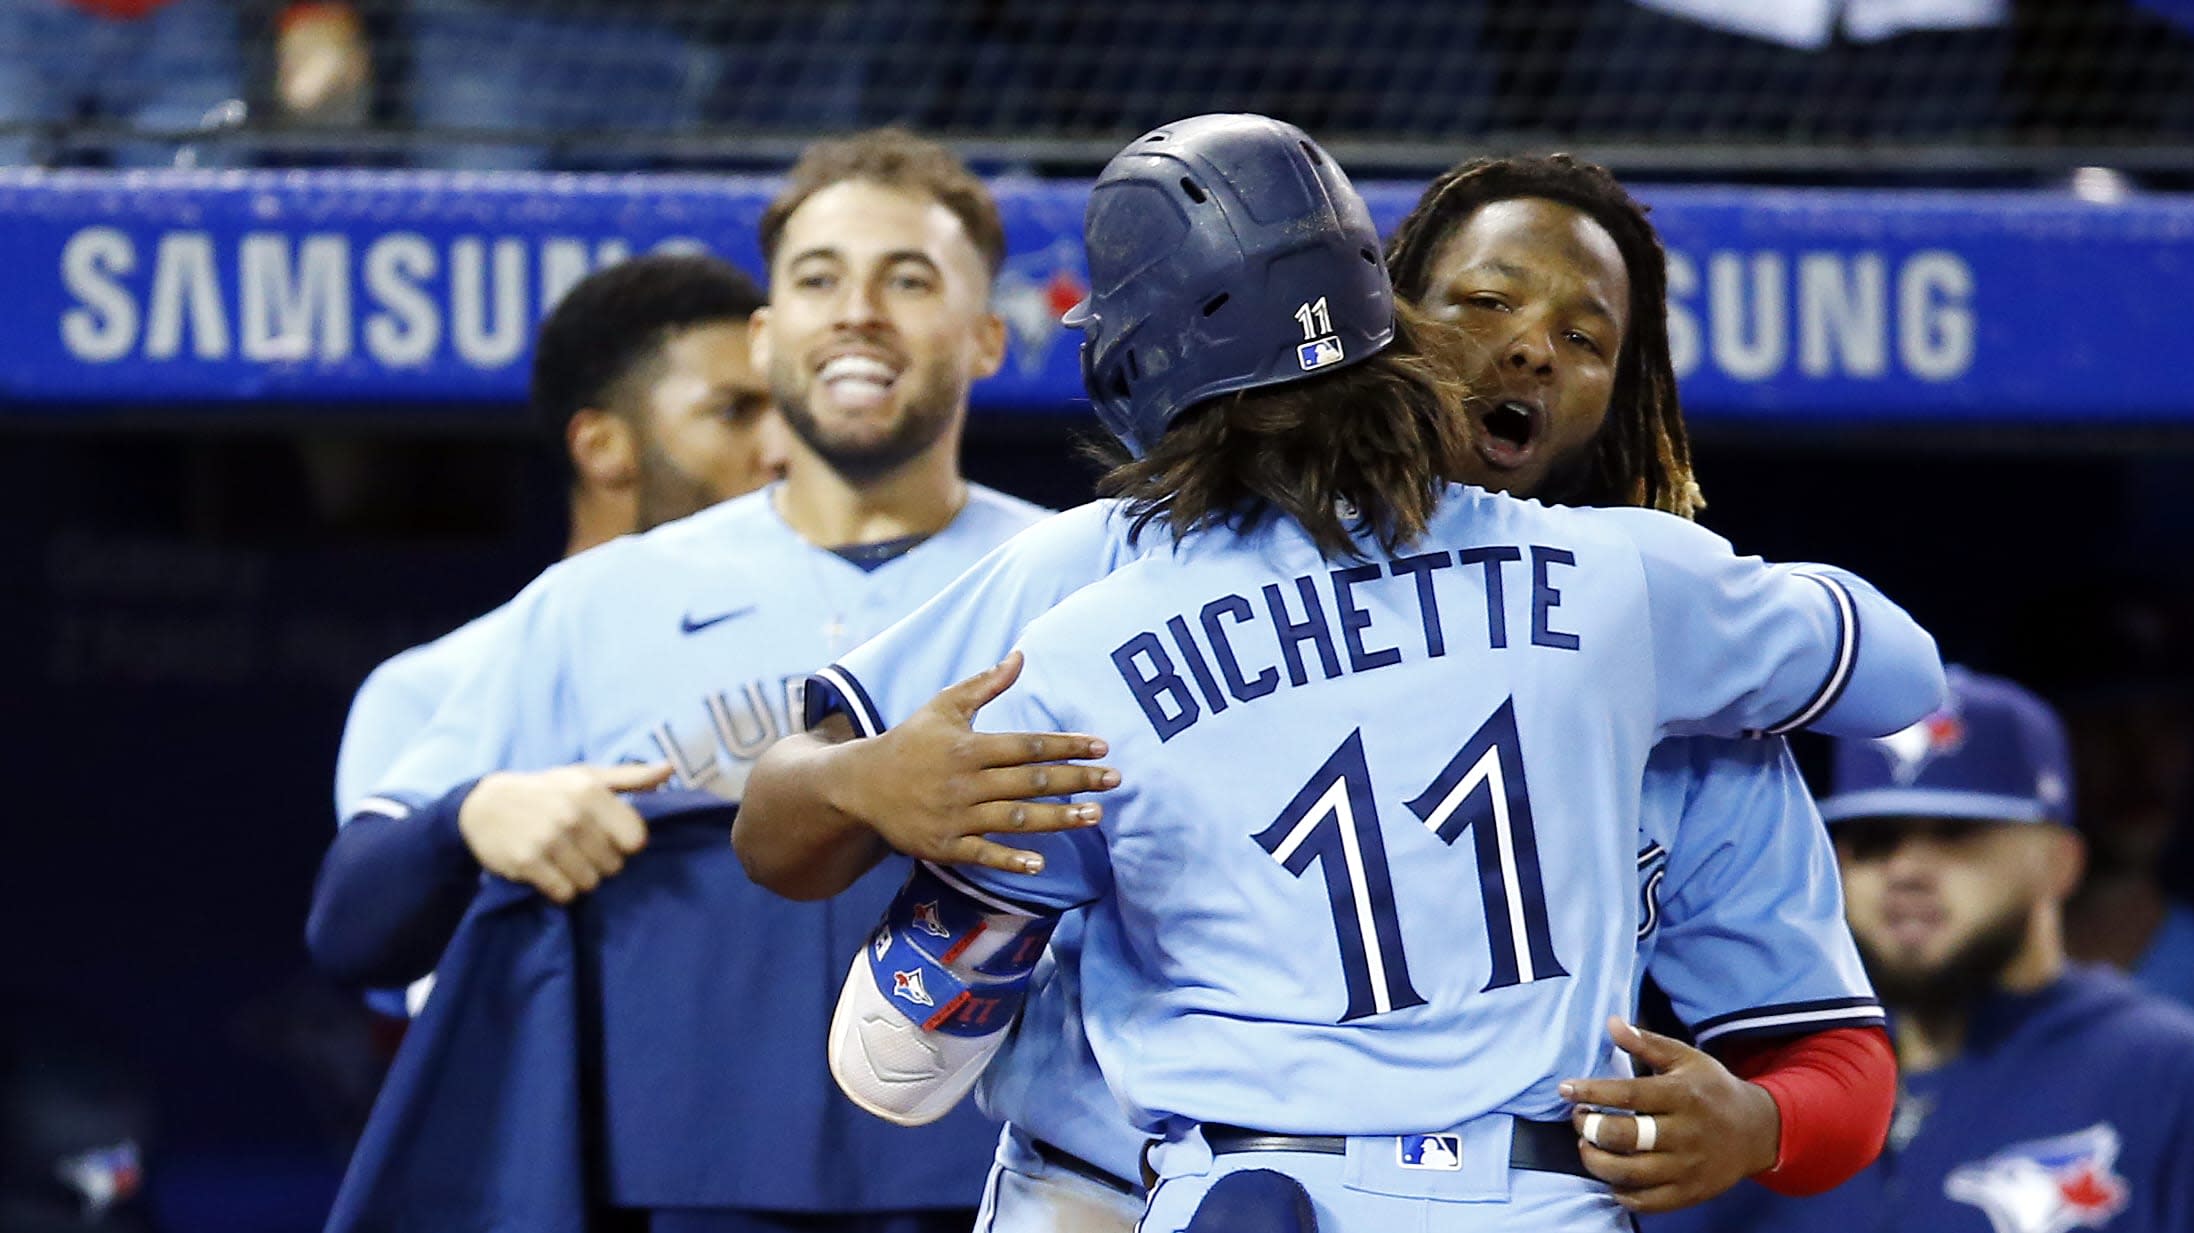 Toronto Blue Jays - QUESTION: Who's rocking the more impressive